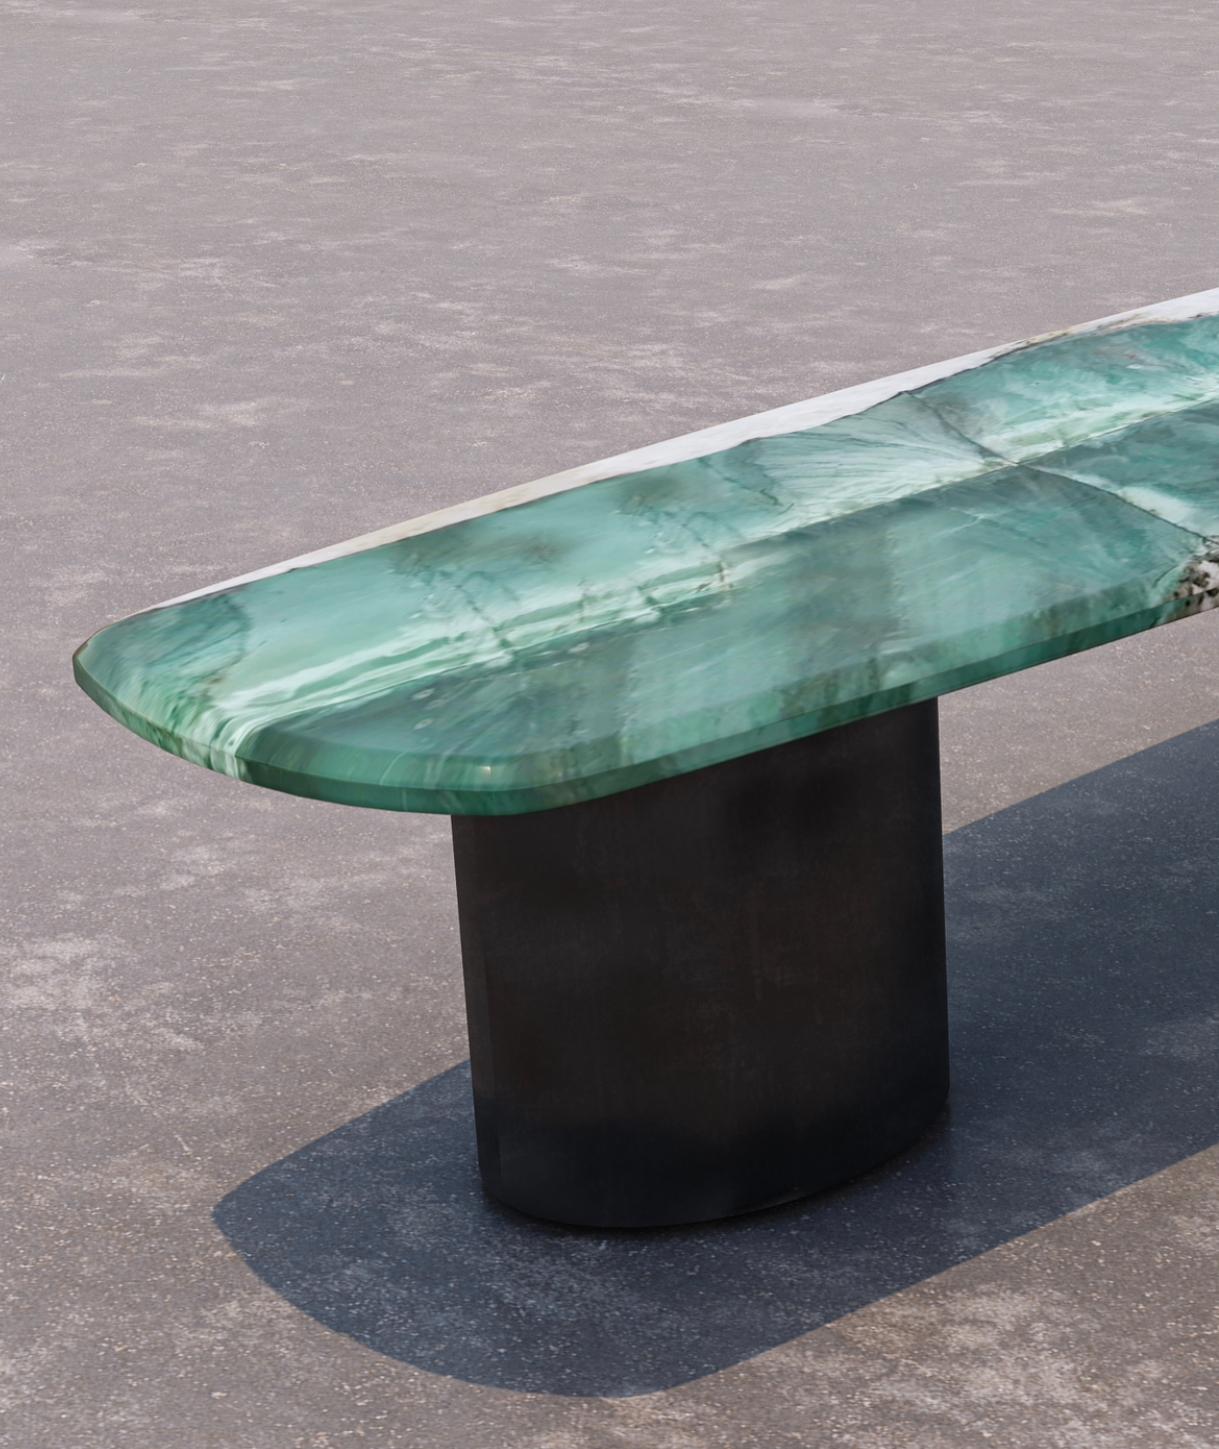 Very large 425cm-long dining table in Patagonia Green marble. 

Ideally for 10 to 12 people

Top made of two large 212.5cm slabs (with a joint in the middle).
Polished finish. 

Each piece will be unique, as the marble used is a natural marble with